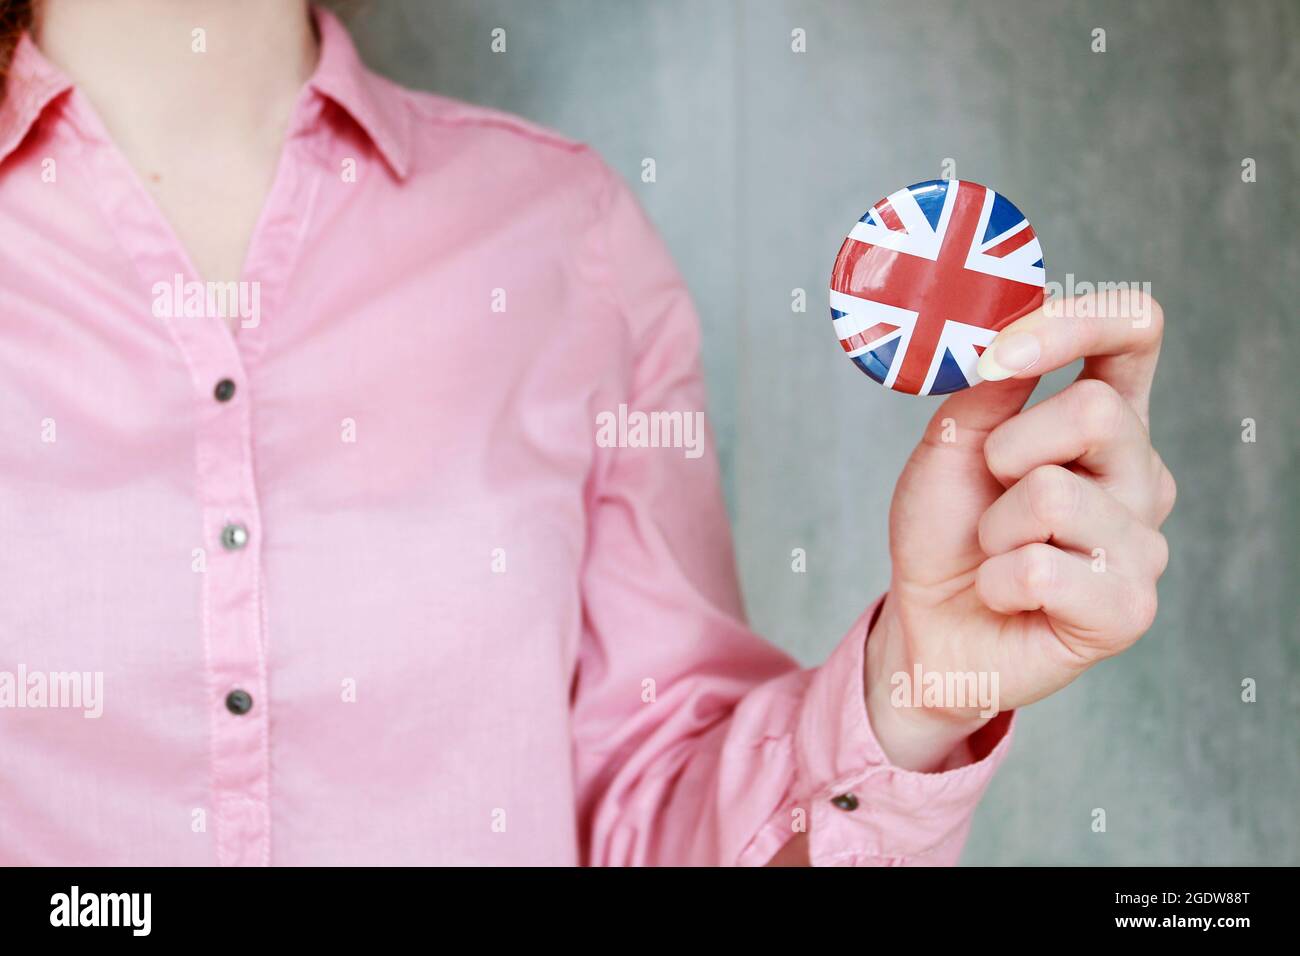 The flag of Great Britain, commonly known as the Union Jack printed on button badge, holding by woman in her beautiful hand. Stock Photo